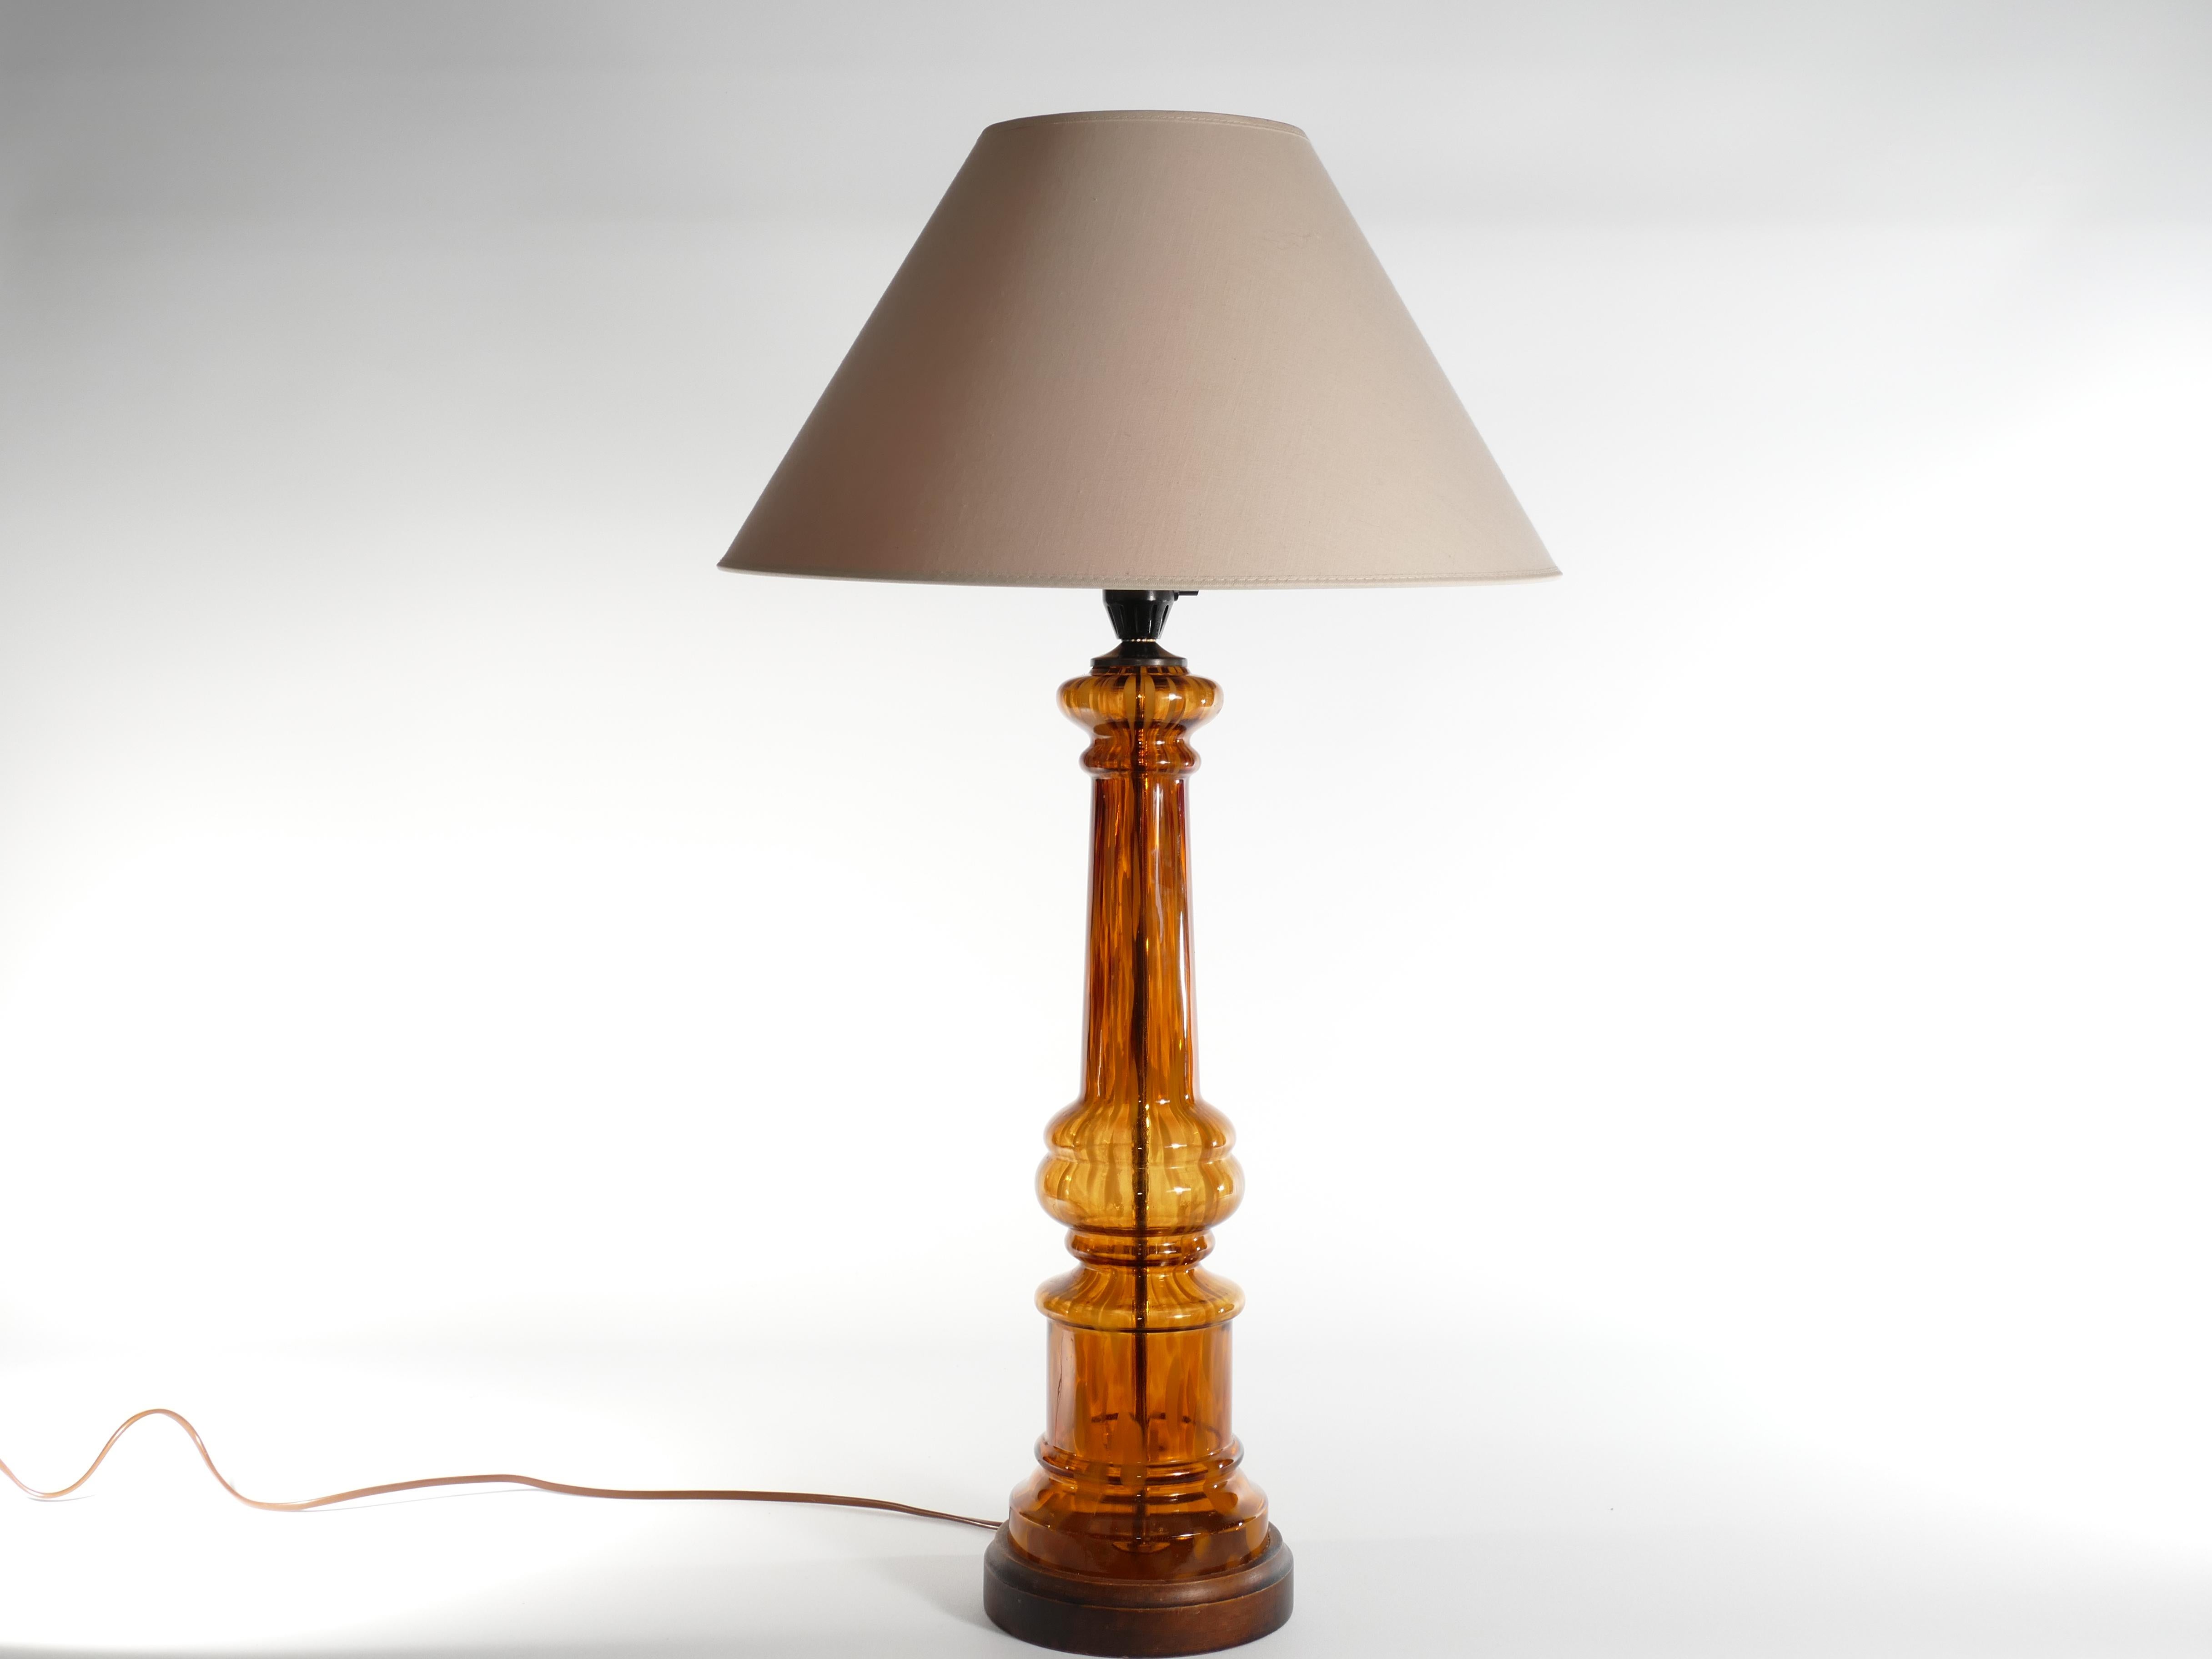 Hand-Crafted Scandinavian Modern Amber Glass Table Lamp by Miranda, 1970s For Sale